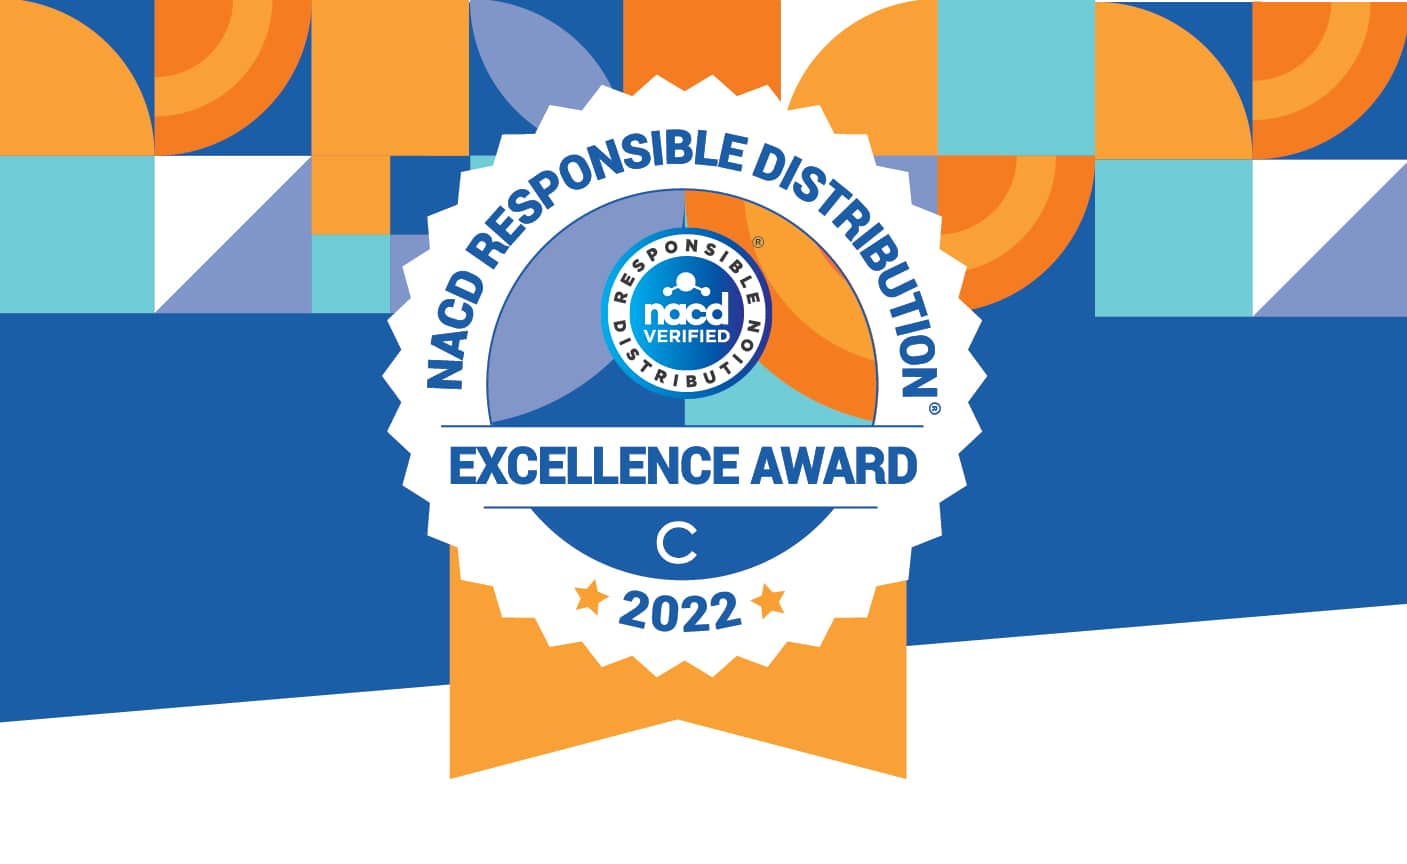 Coast Southwest Receives 2022 Nacd Responsible Distribution Excellence Award